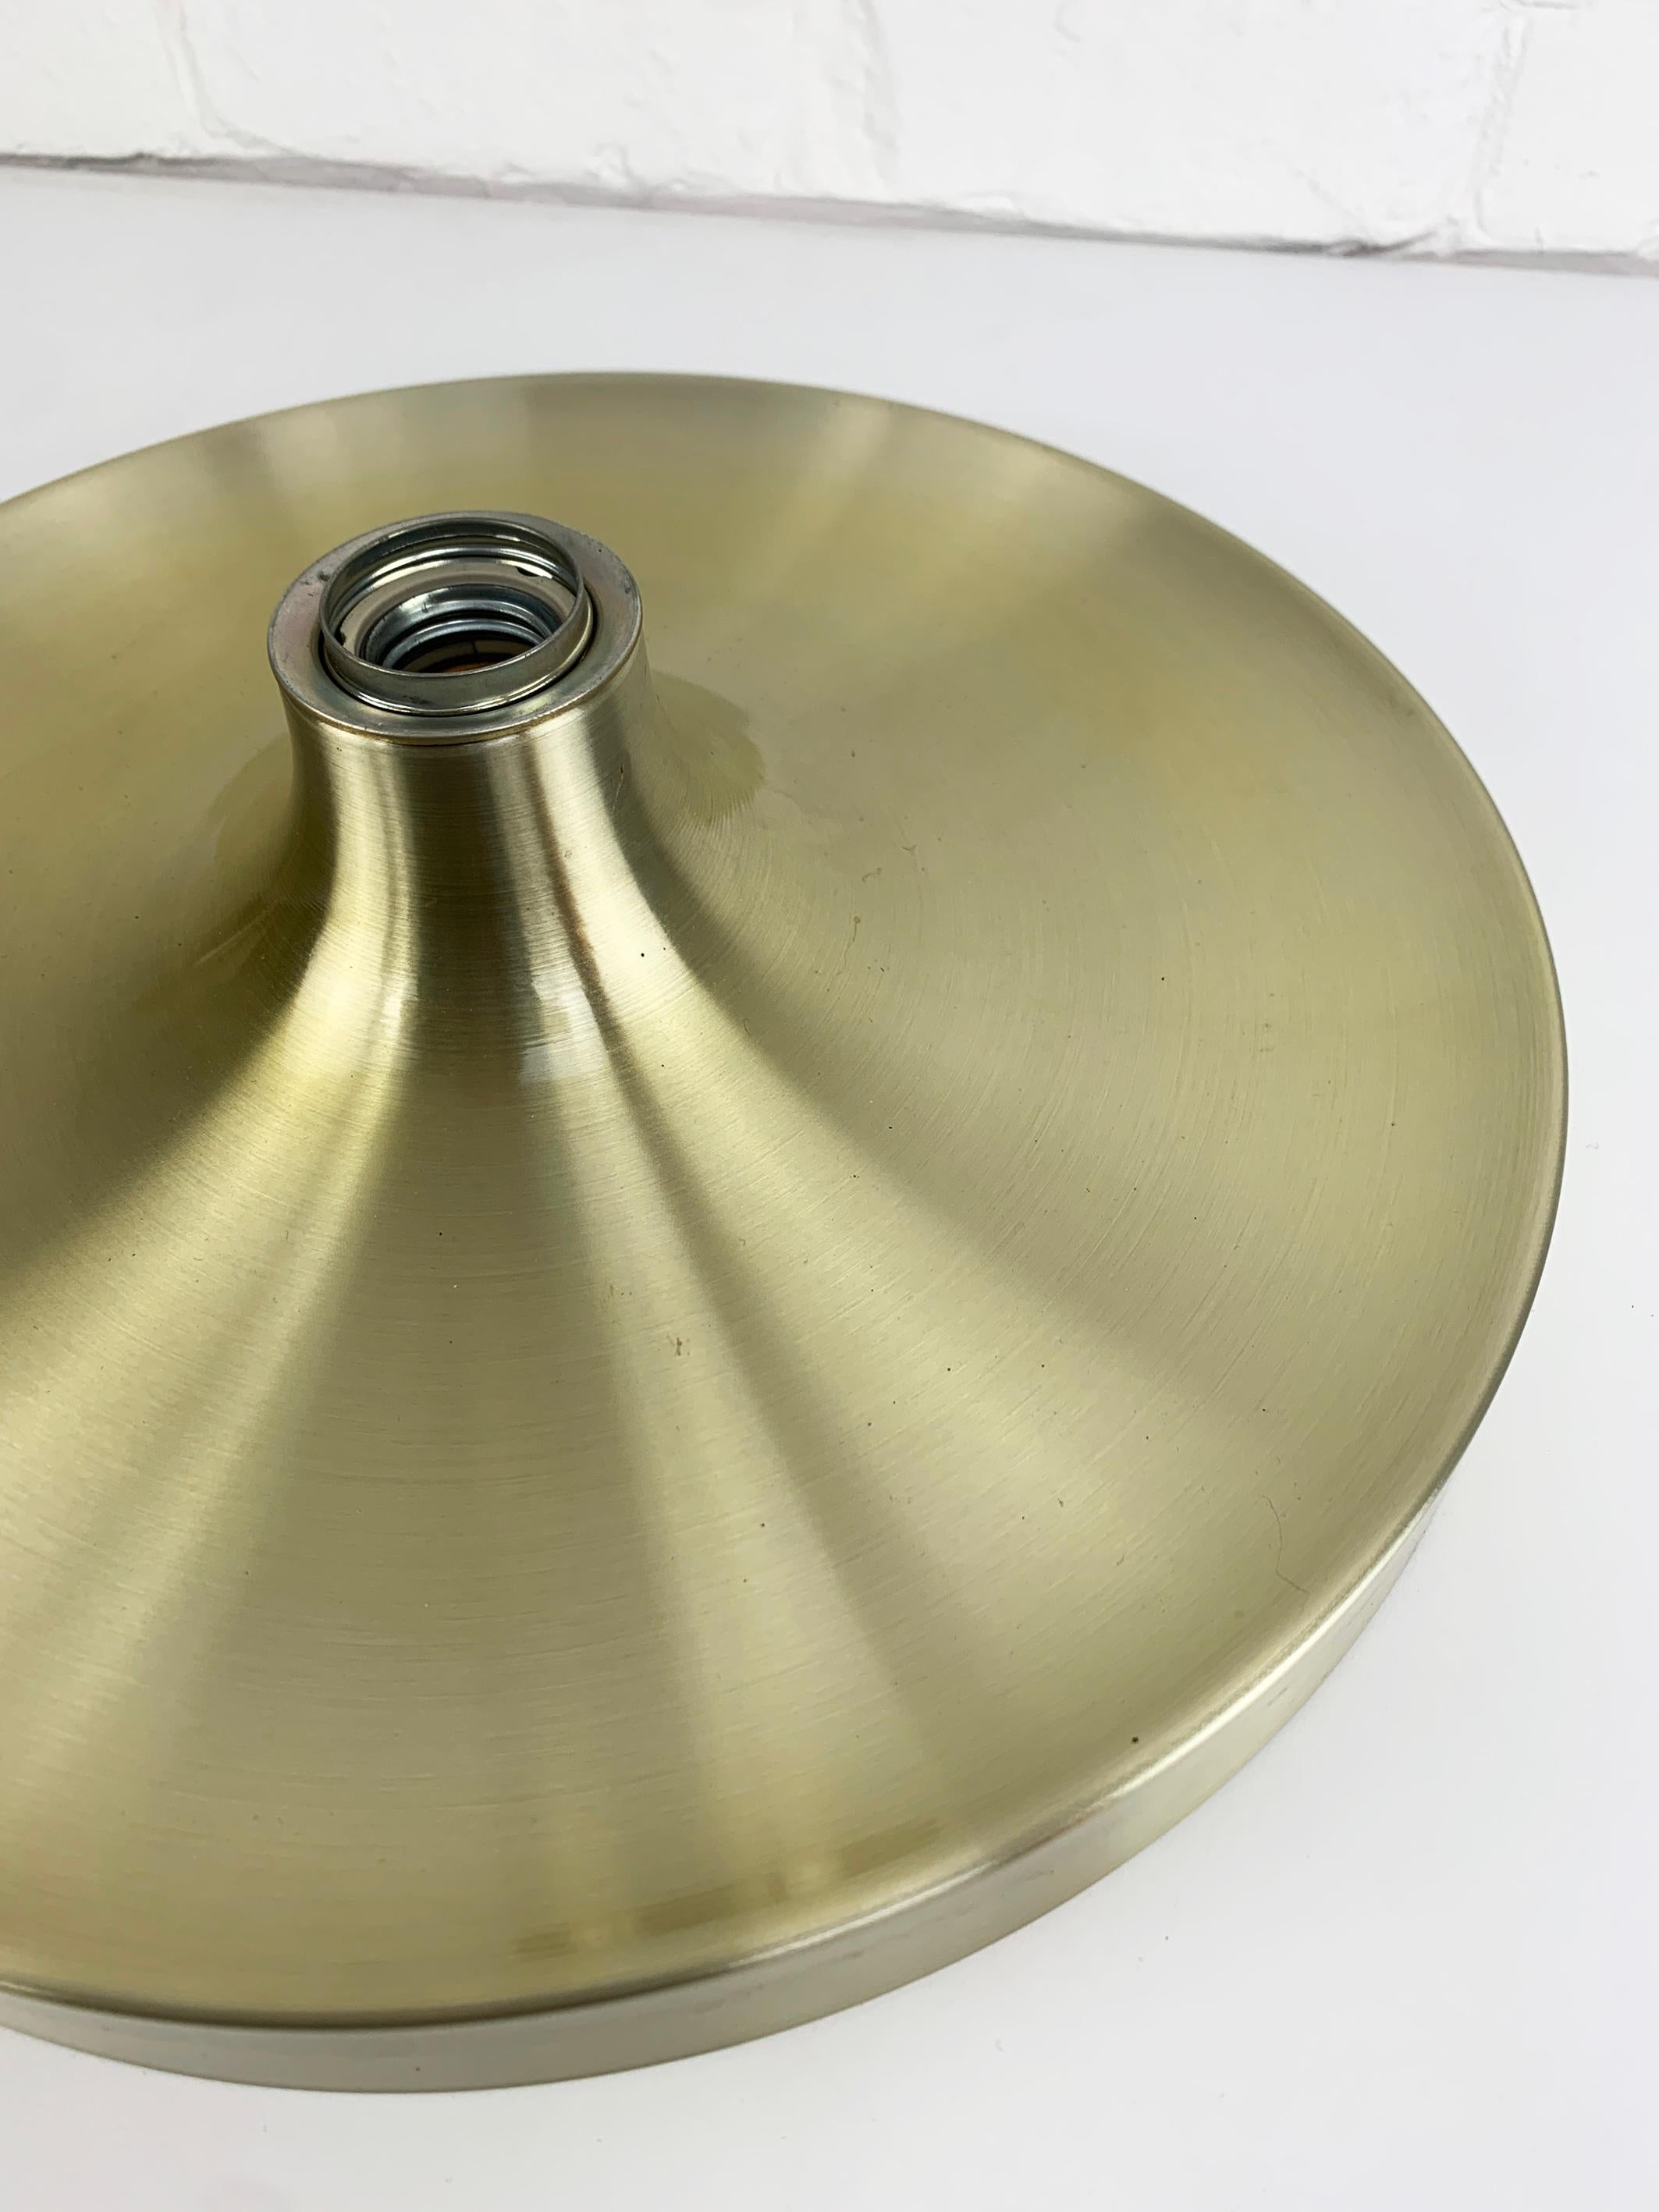 Charlotte Perriand Flush Sconce Gold Disc Wall Light, Germany, 1960s For Sale 2